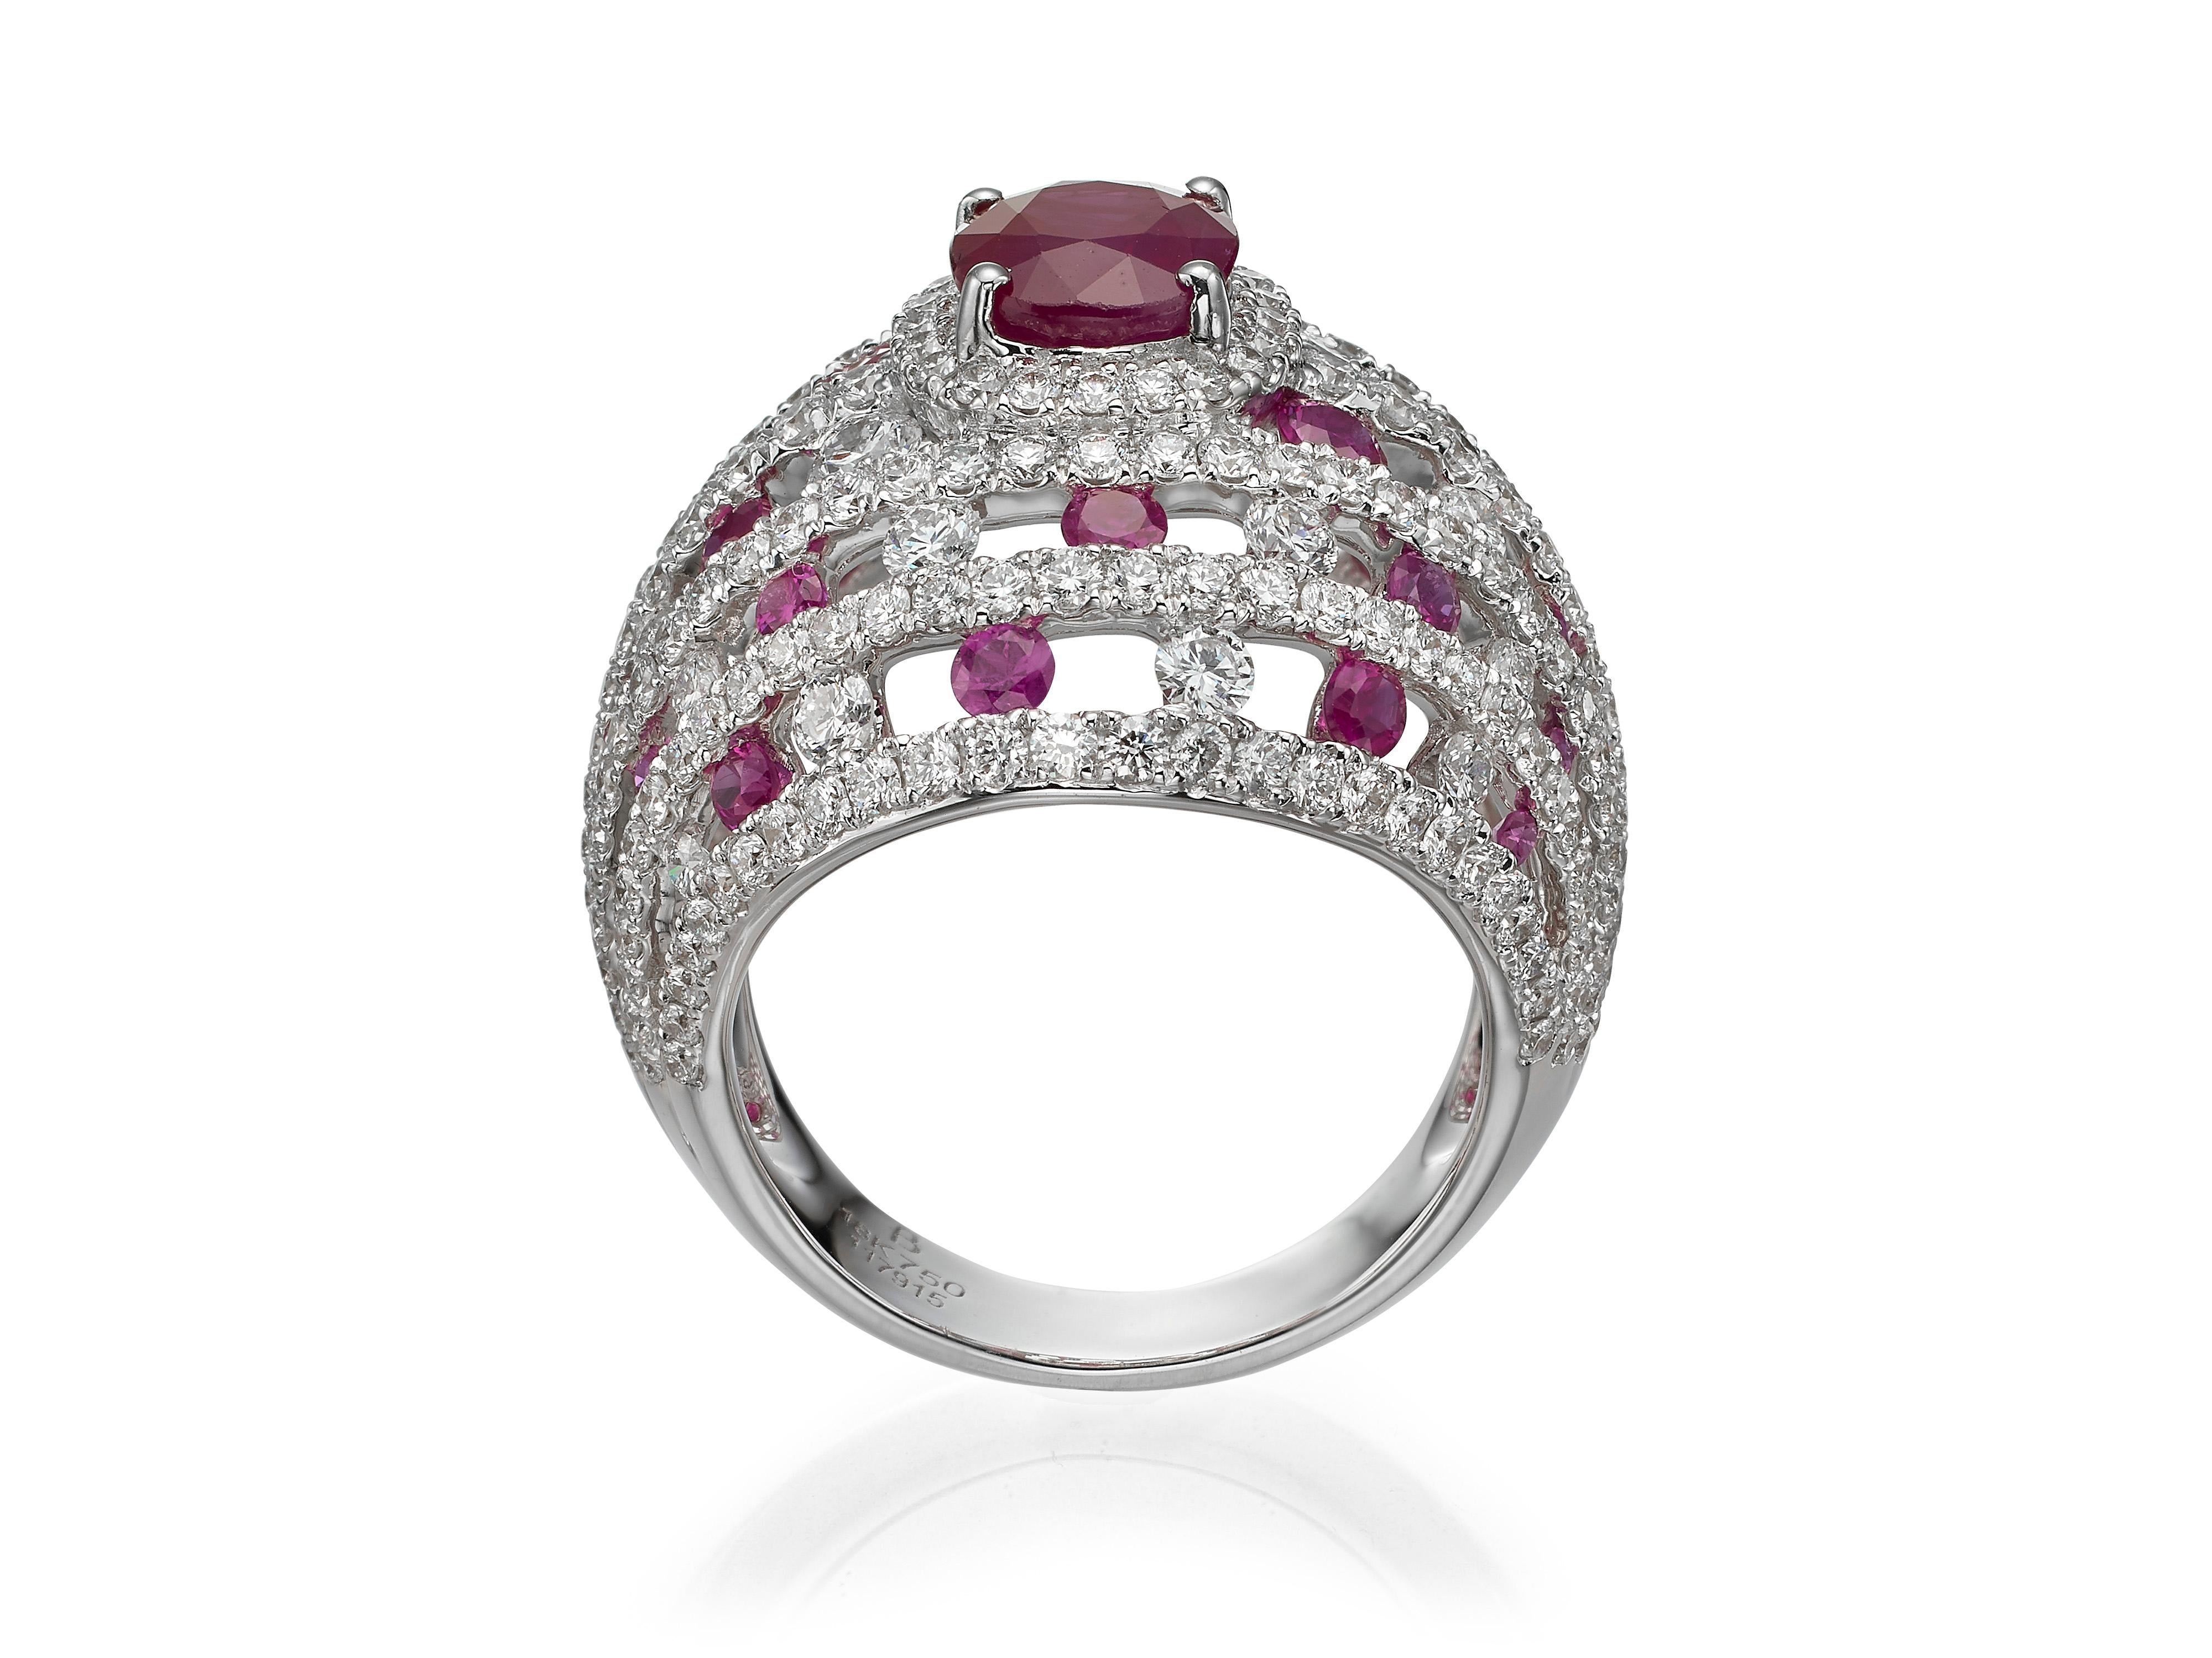 A breathtaking 2.23 carat oval ruby is surrounded by a halo of alternating round rubies and diamonds.  Set in 18K white gold.
Currently a ring size US 7.  For other sizes, please contact seller. 

Composition:
18K White Gold
1 Oval Ruby: 2.23